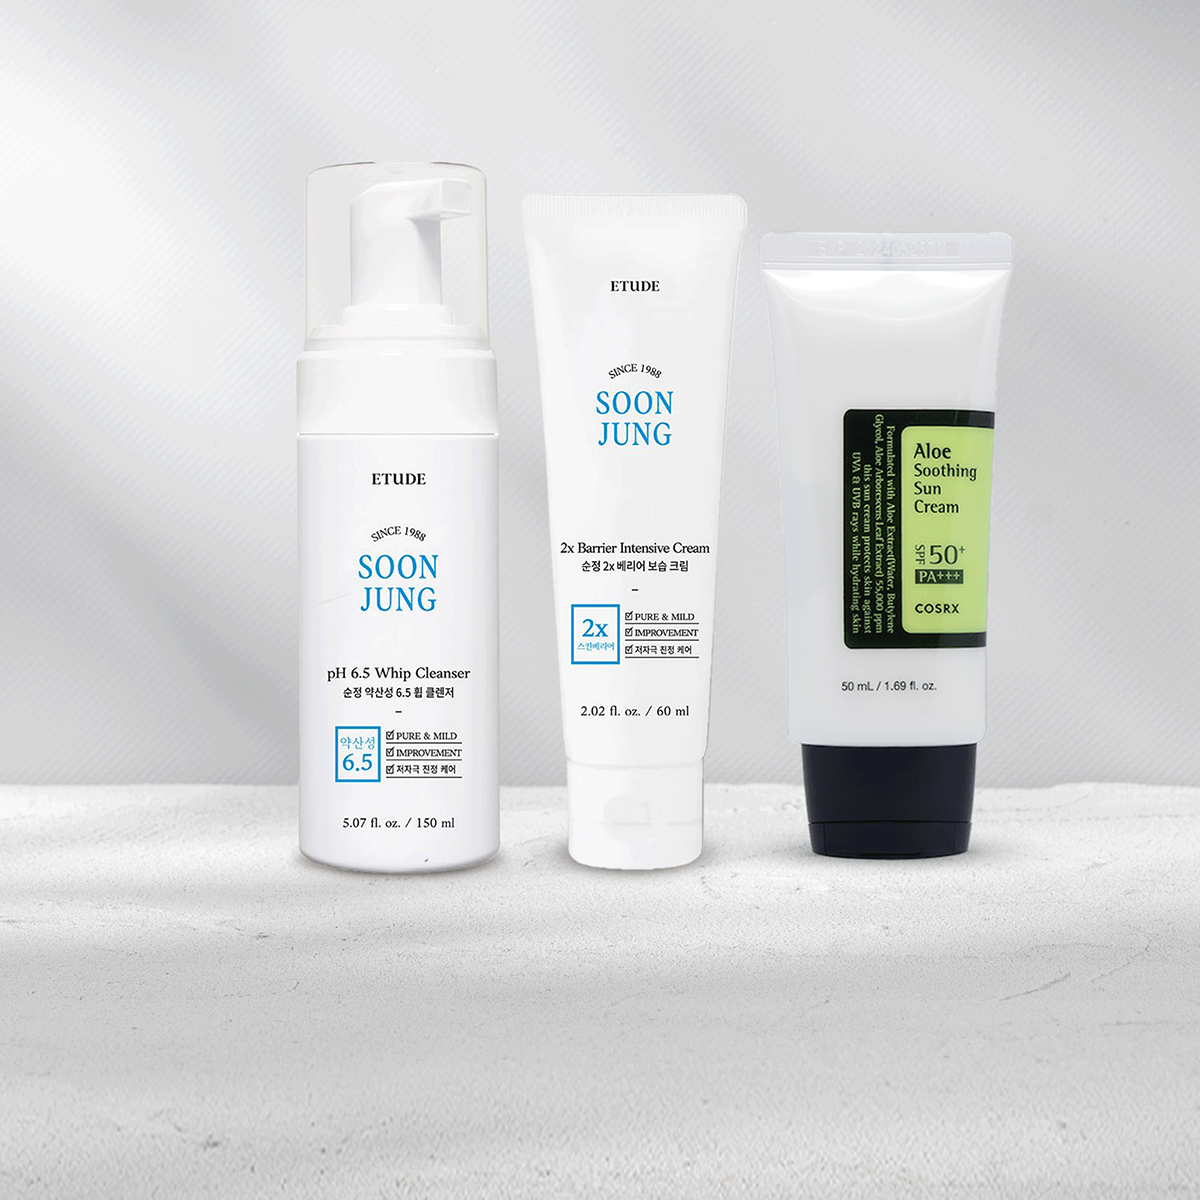 Skincare products including cleanser, moisturizer and suncare standing next to each other.